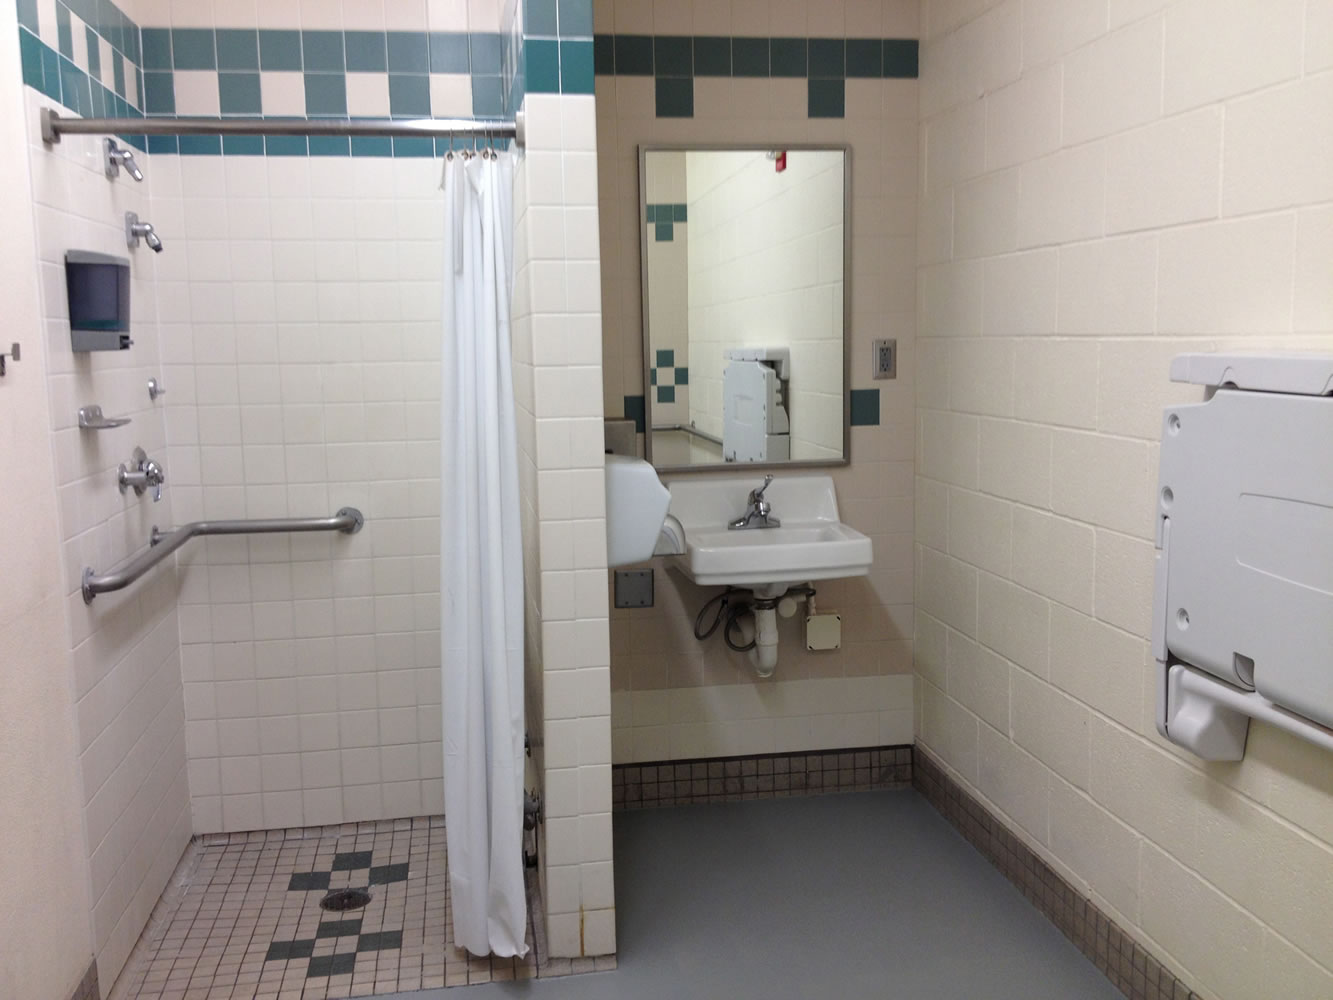 One of three private, family shower rooms used by the public at the James Parsley Community Center.